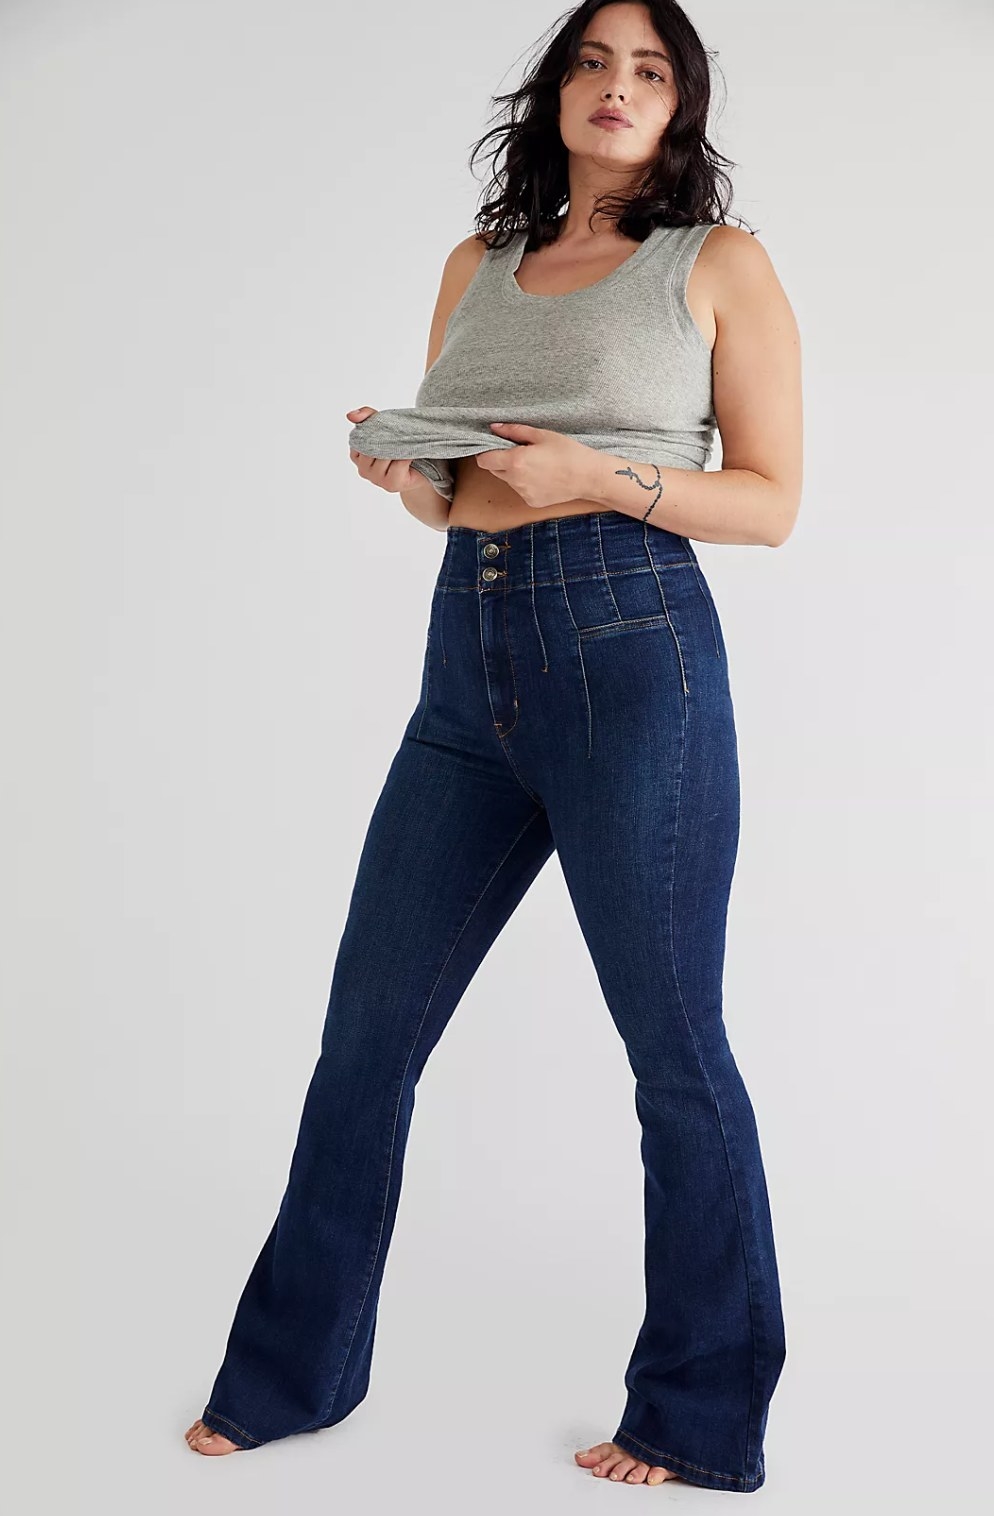 model wearing the dark blue flare jeans and a gray tank top holding it up and out in front of them